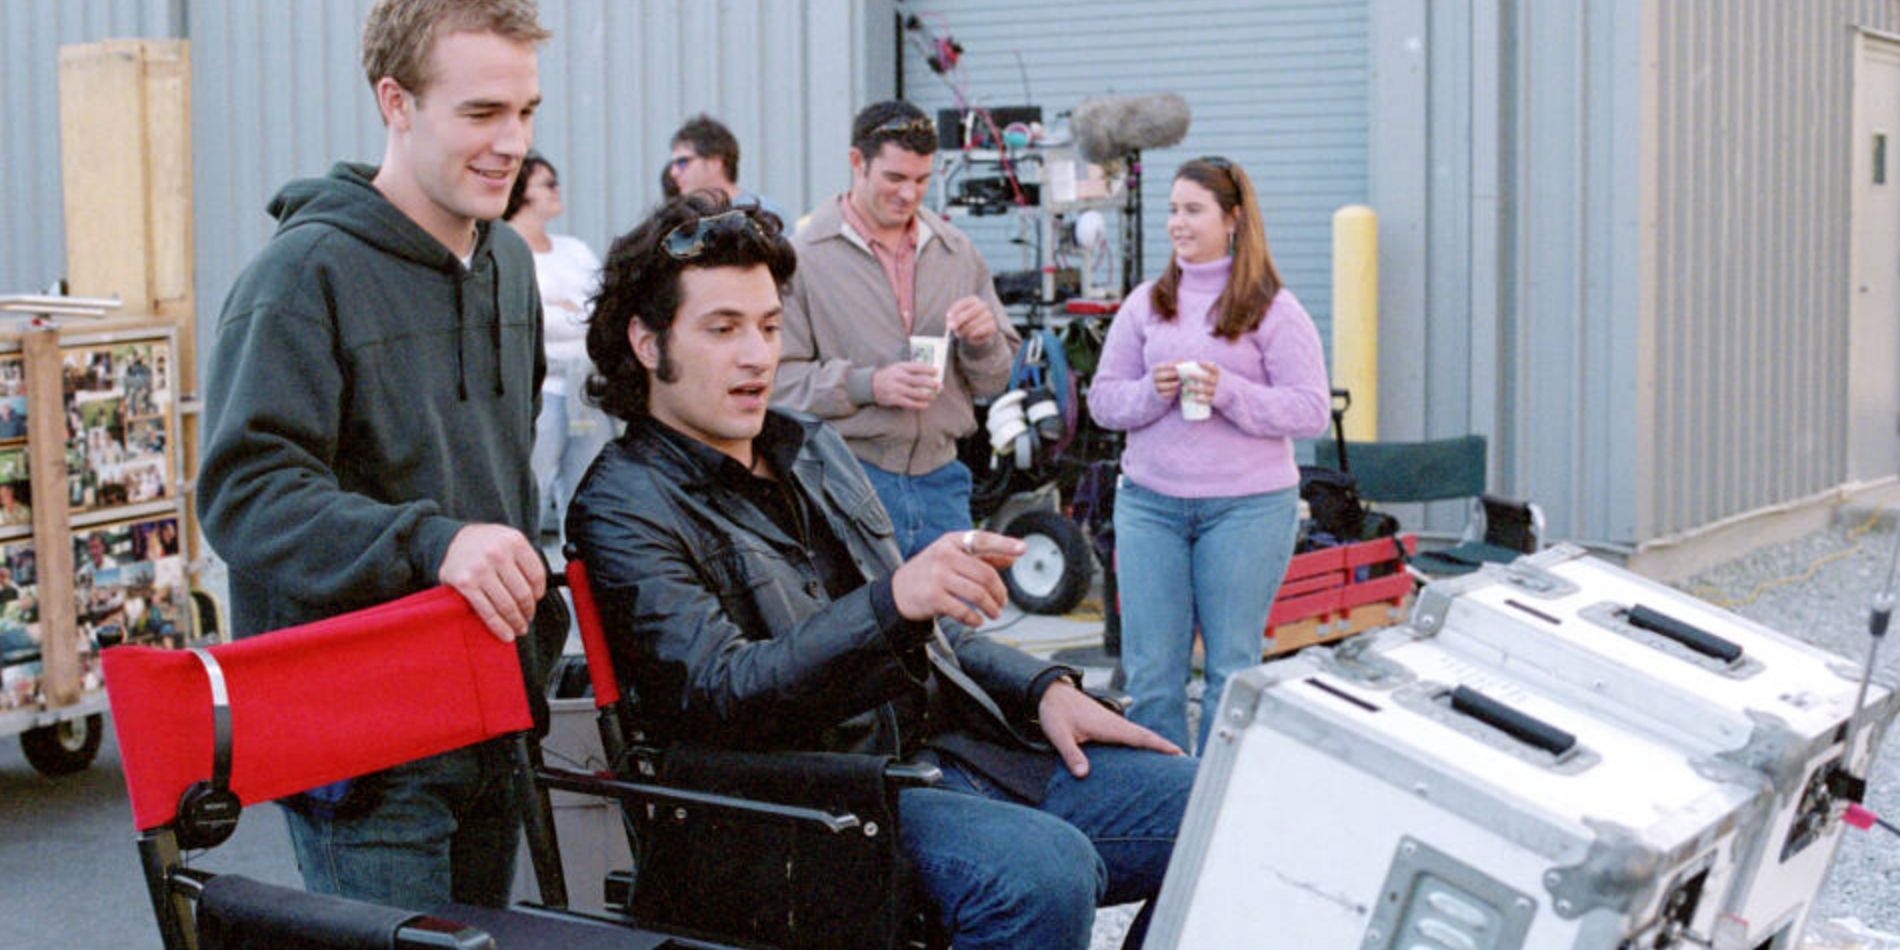 Todd in the director's chair with Dawson behind him in Dawson's Creek